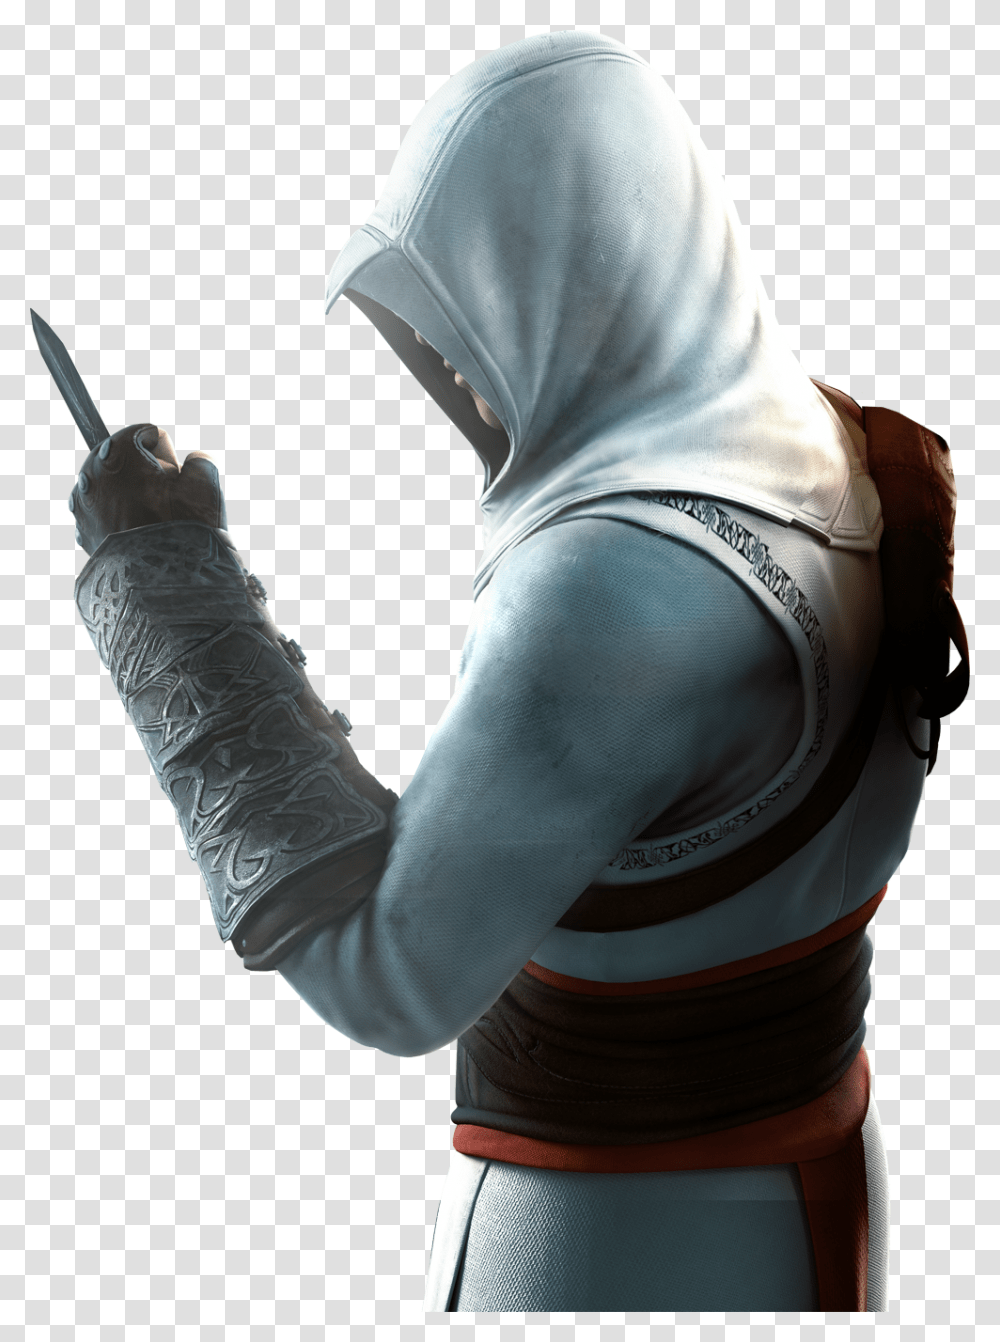 Altair Assassins Creed Image For Designing Assassins Creed, Arm, Person, Human, Finger Transparent Png